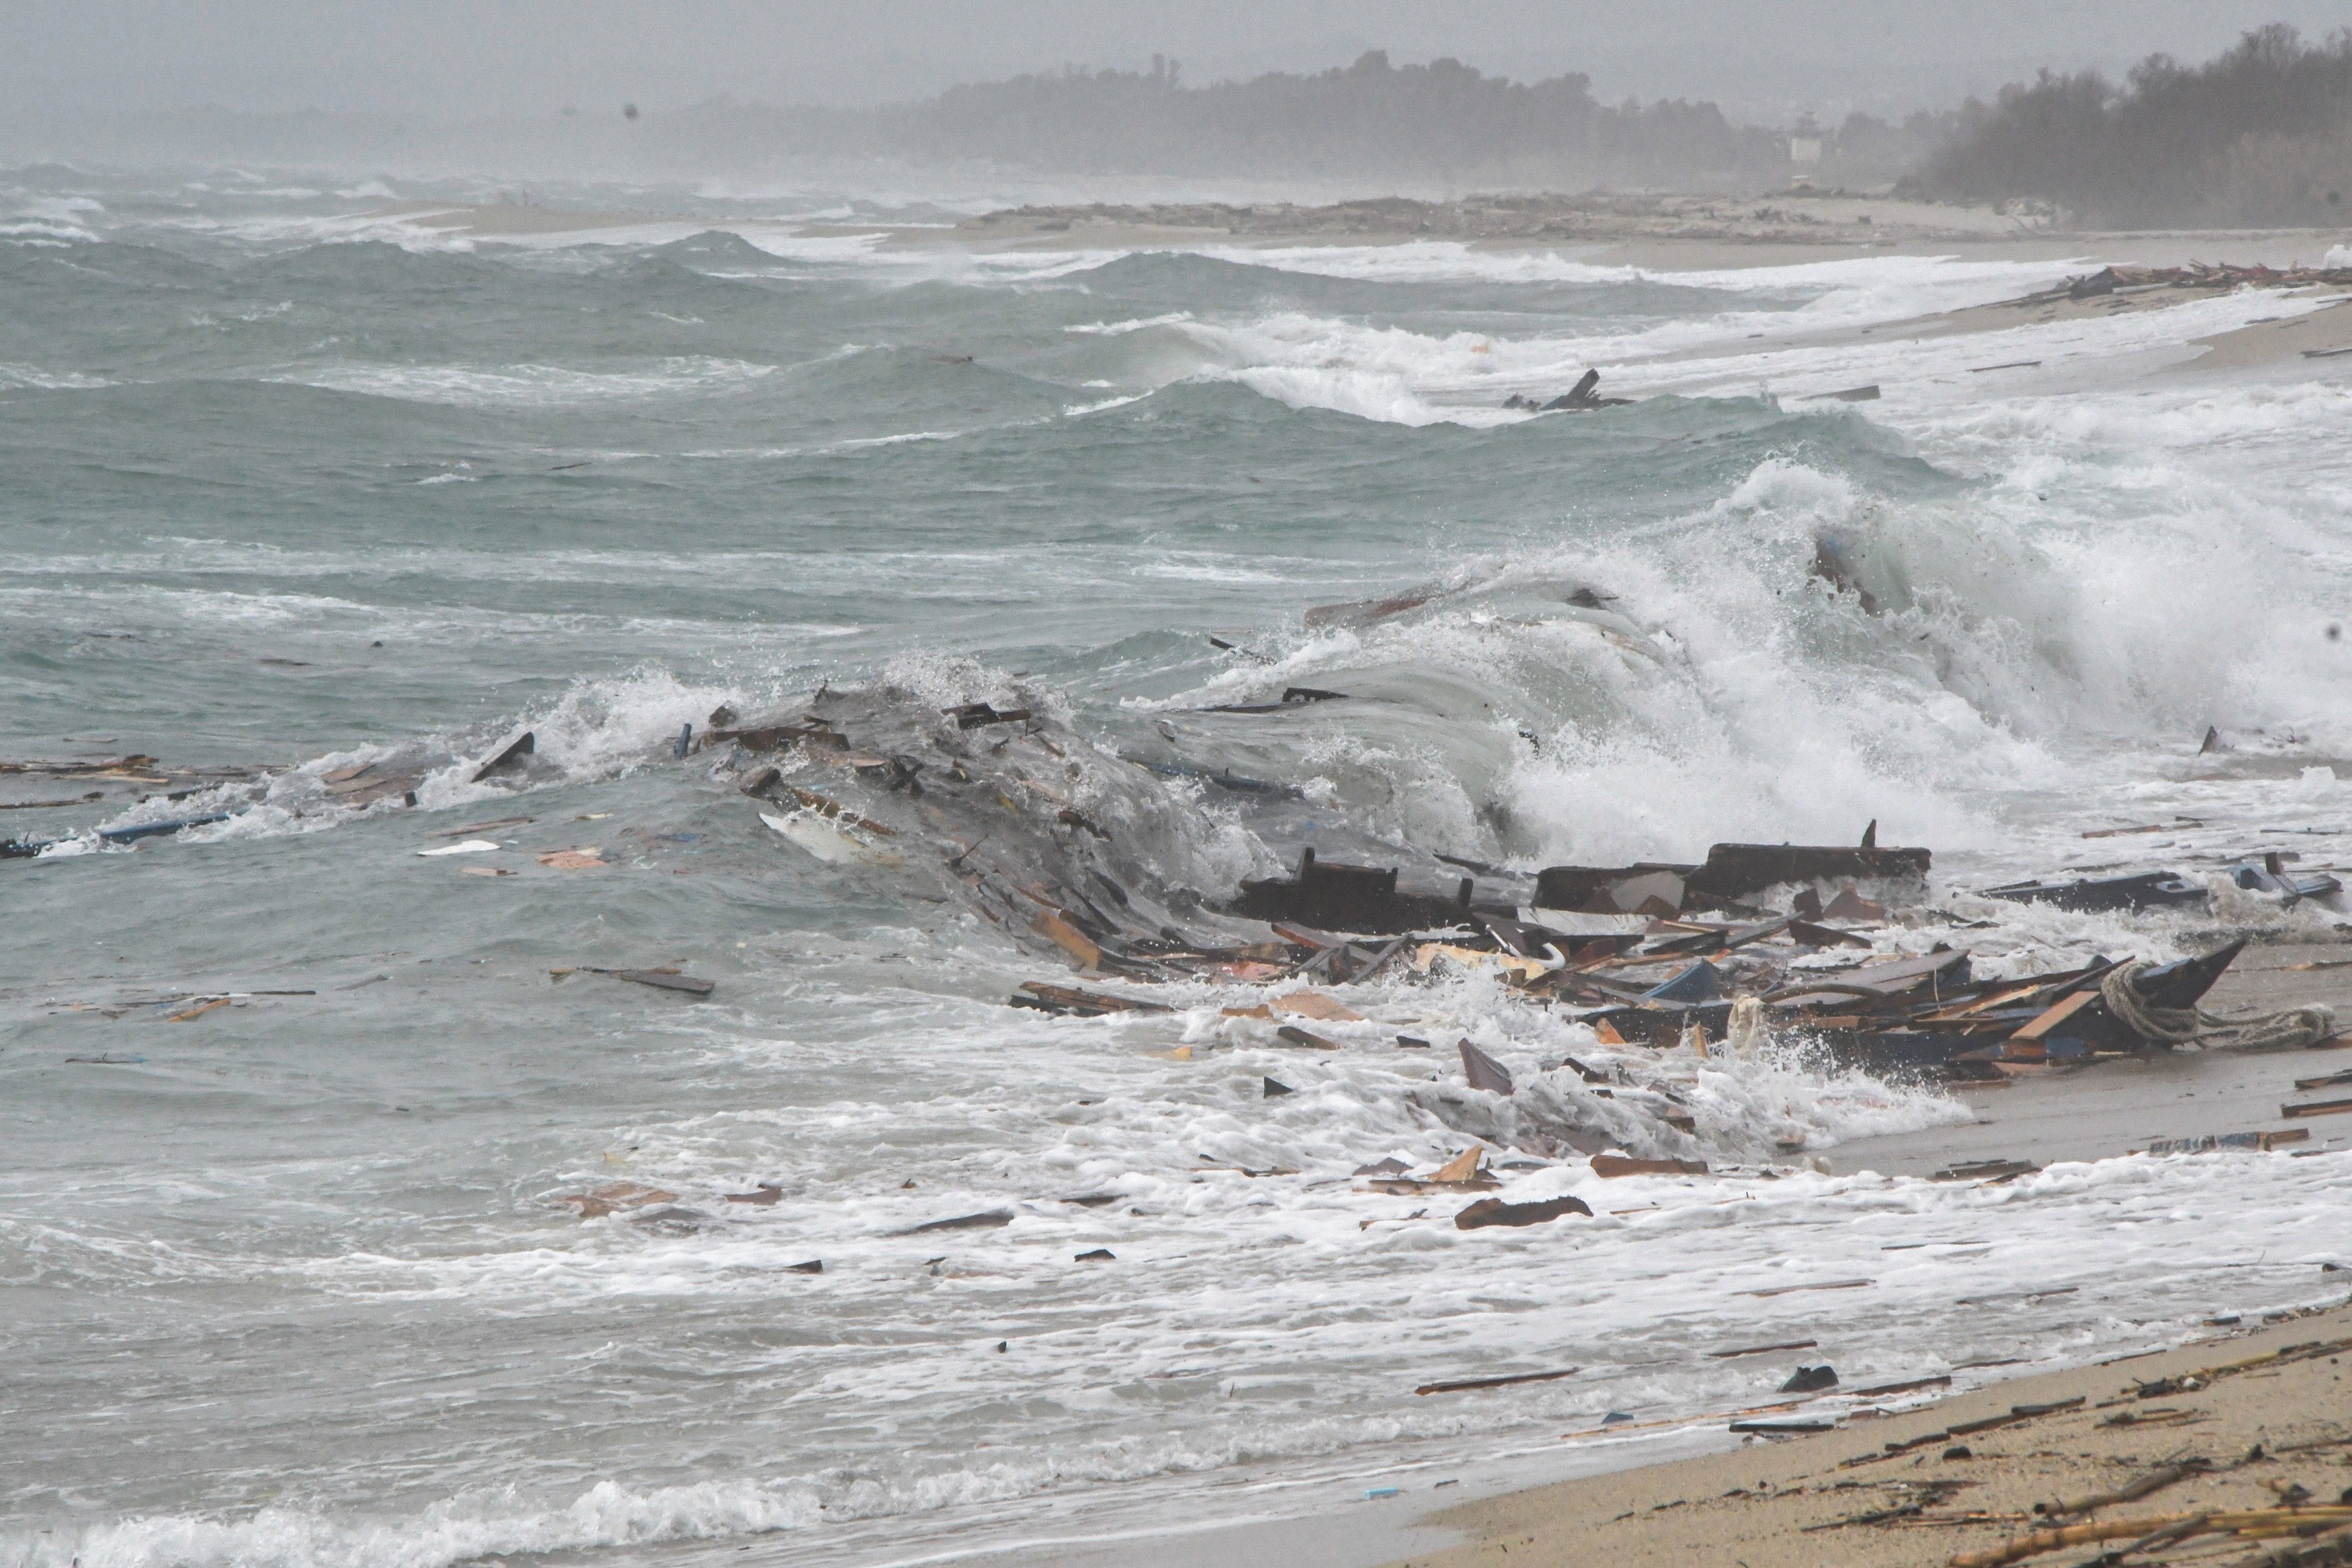 Wreckage from the boat that has washed up ashore. /Giuseppe Pipita/Reuters